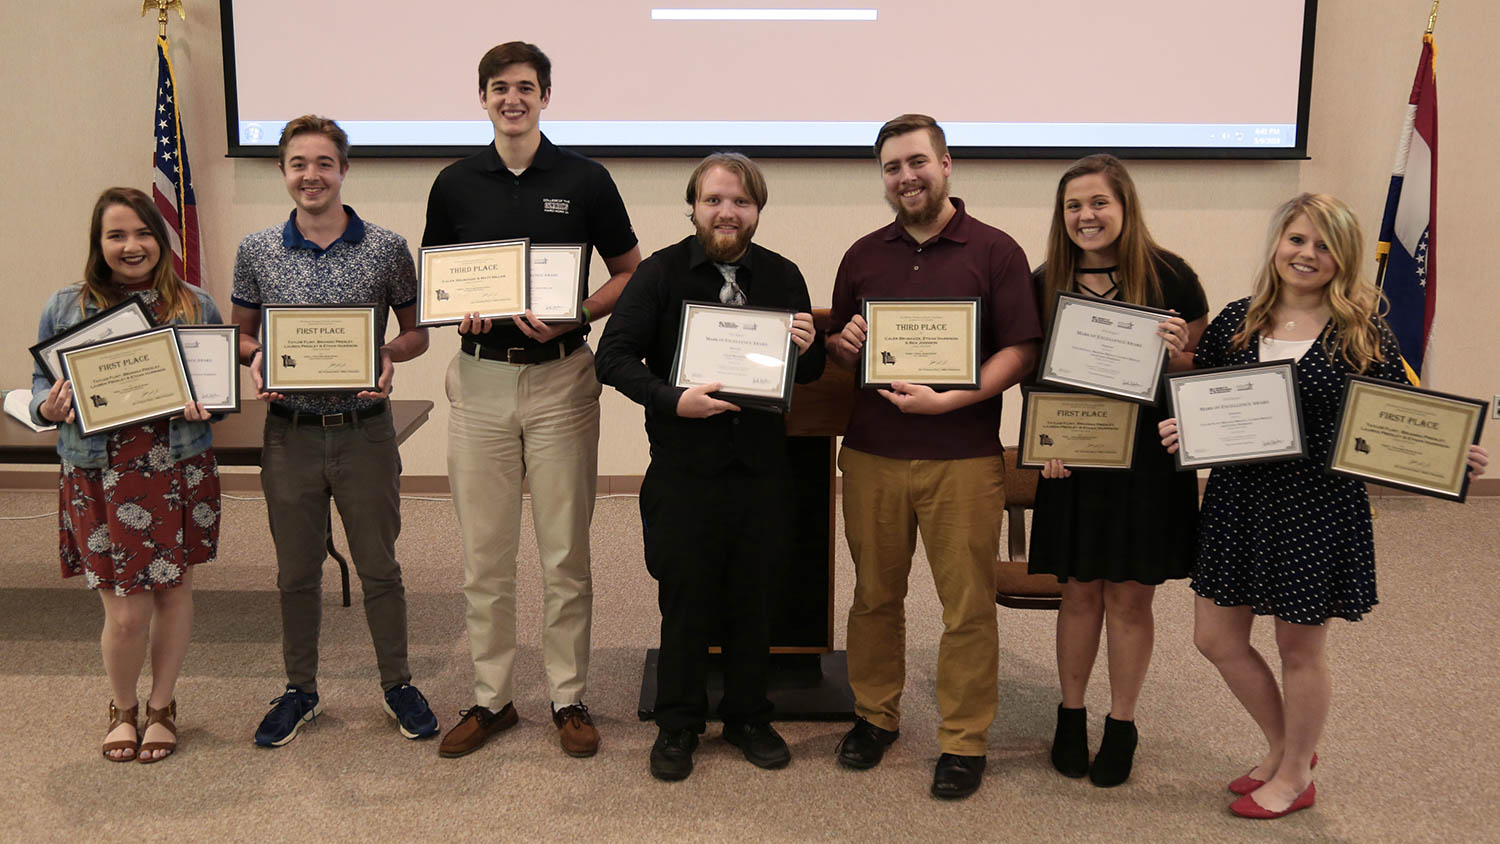 180510 CofO Student The Point Awards Photo 1time NOP - College of the Ozarks student newscast awarded by Missouri Broadcast Educators Association and Society of Professional Journalists